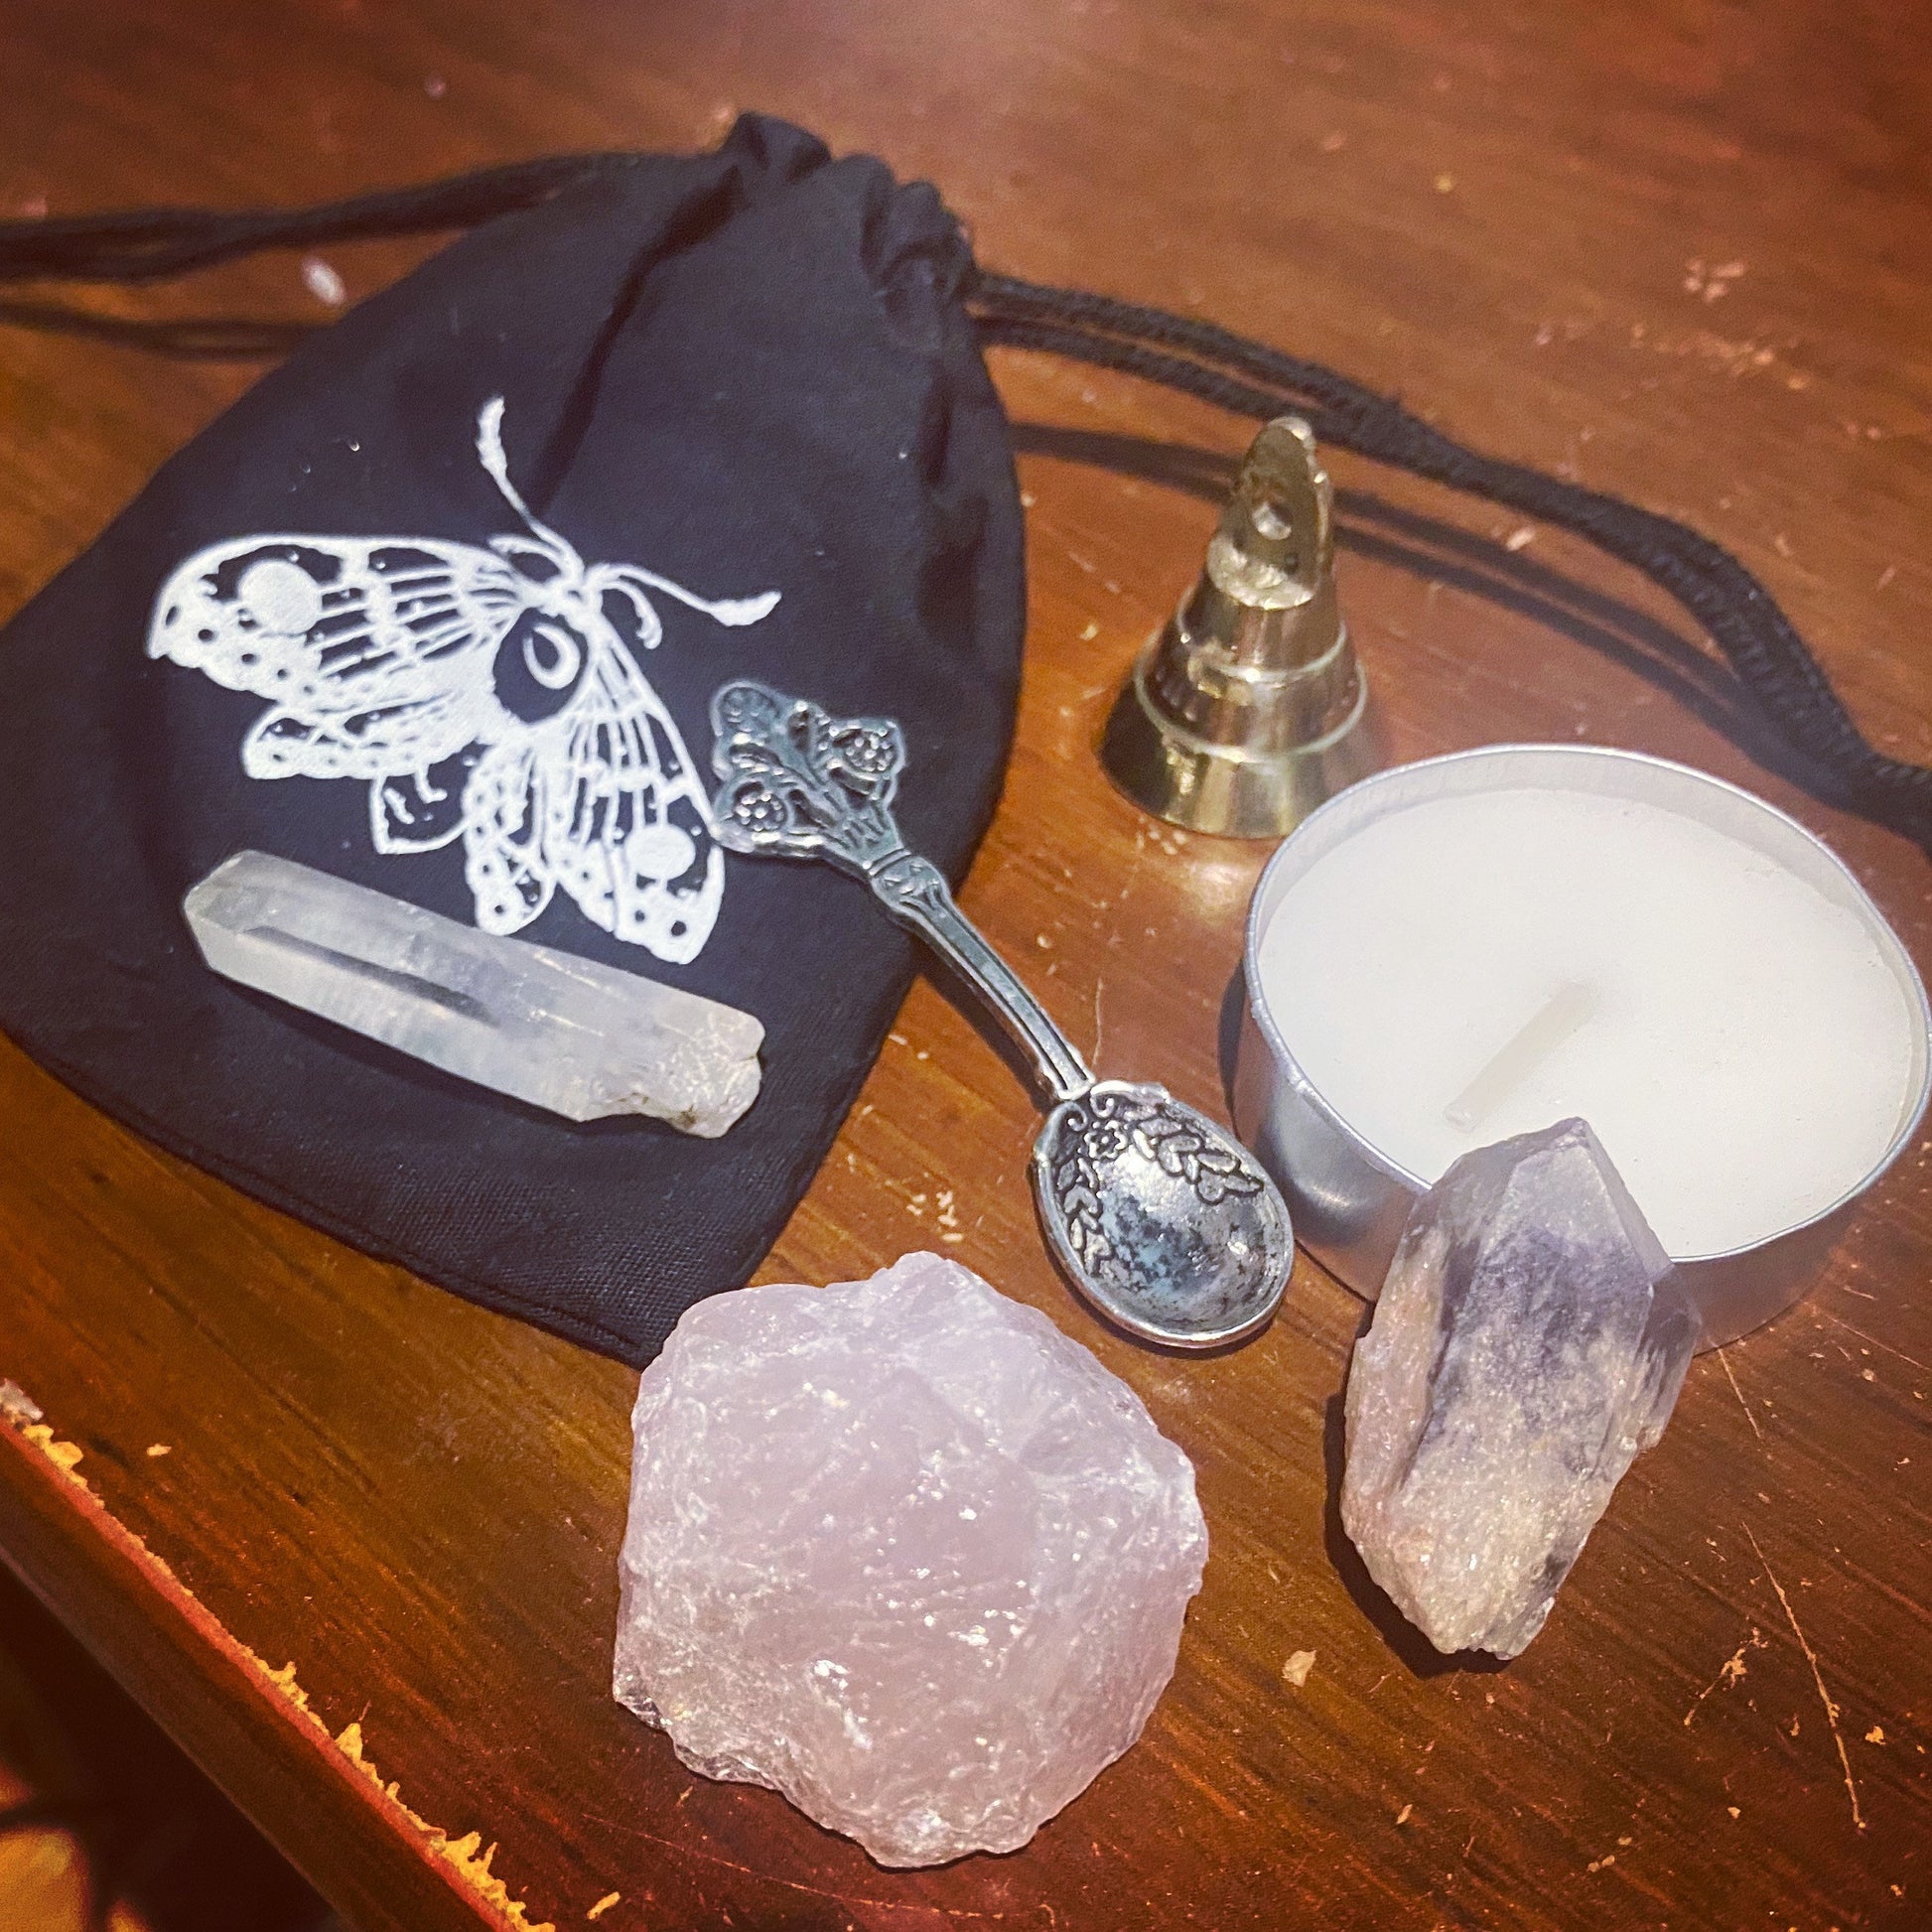 Pocket Witchcraft Kit mini wiccan altar set crystals candle spoon bell